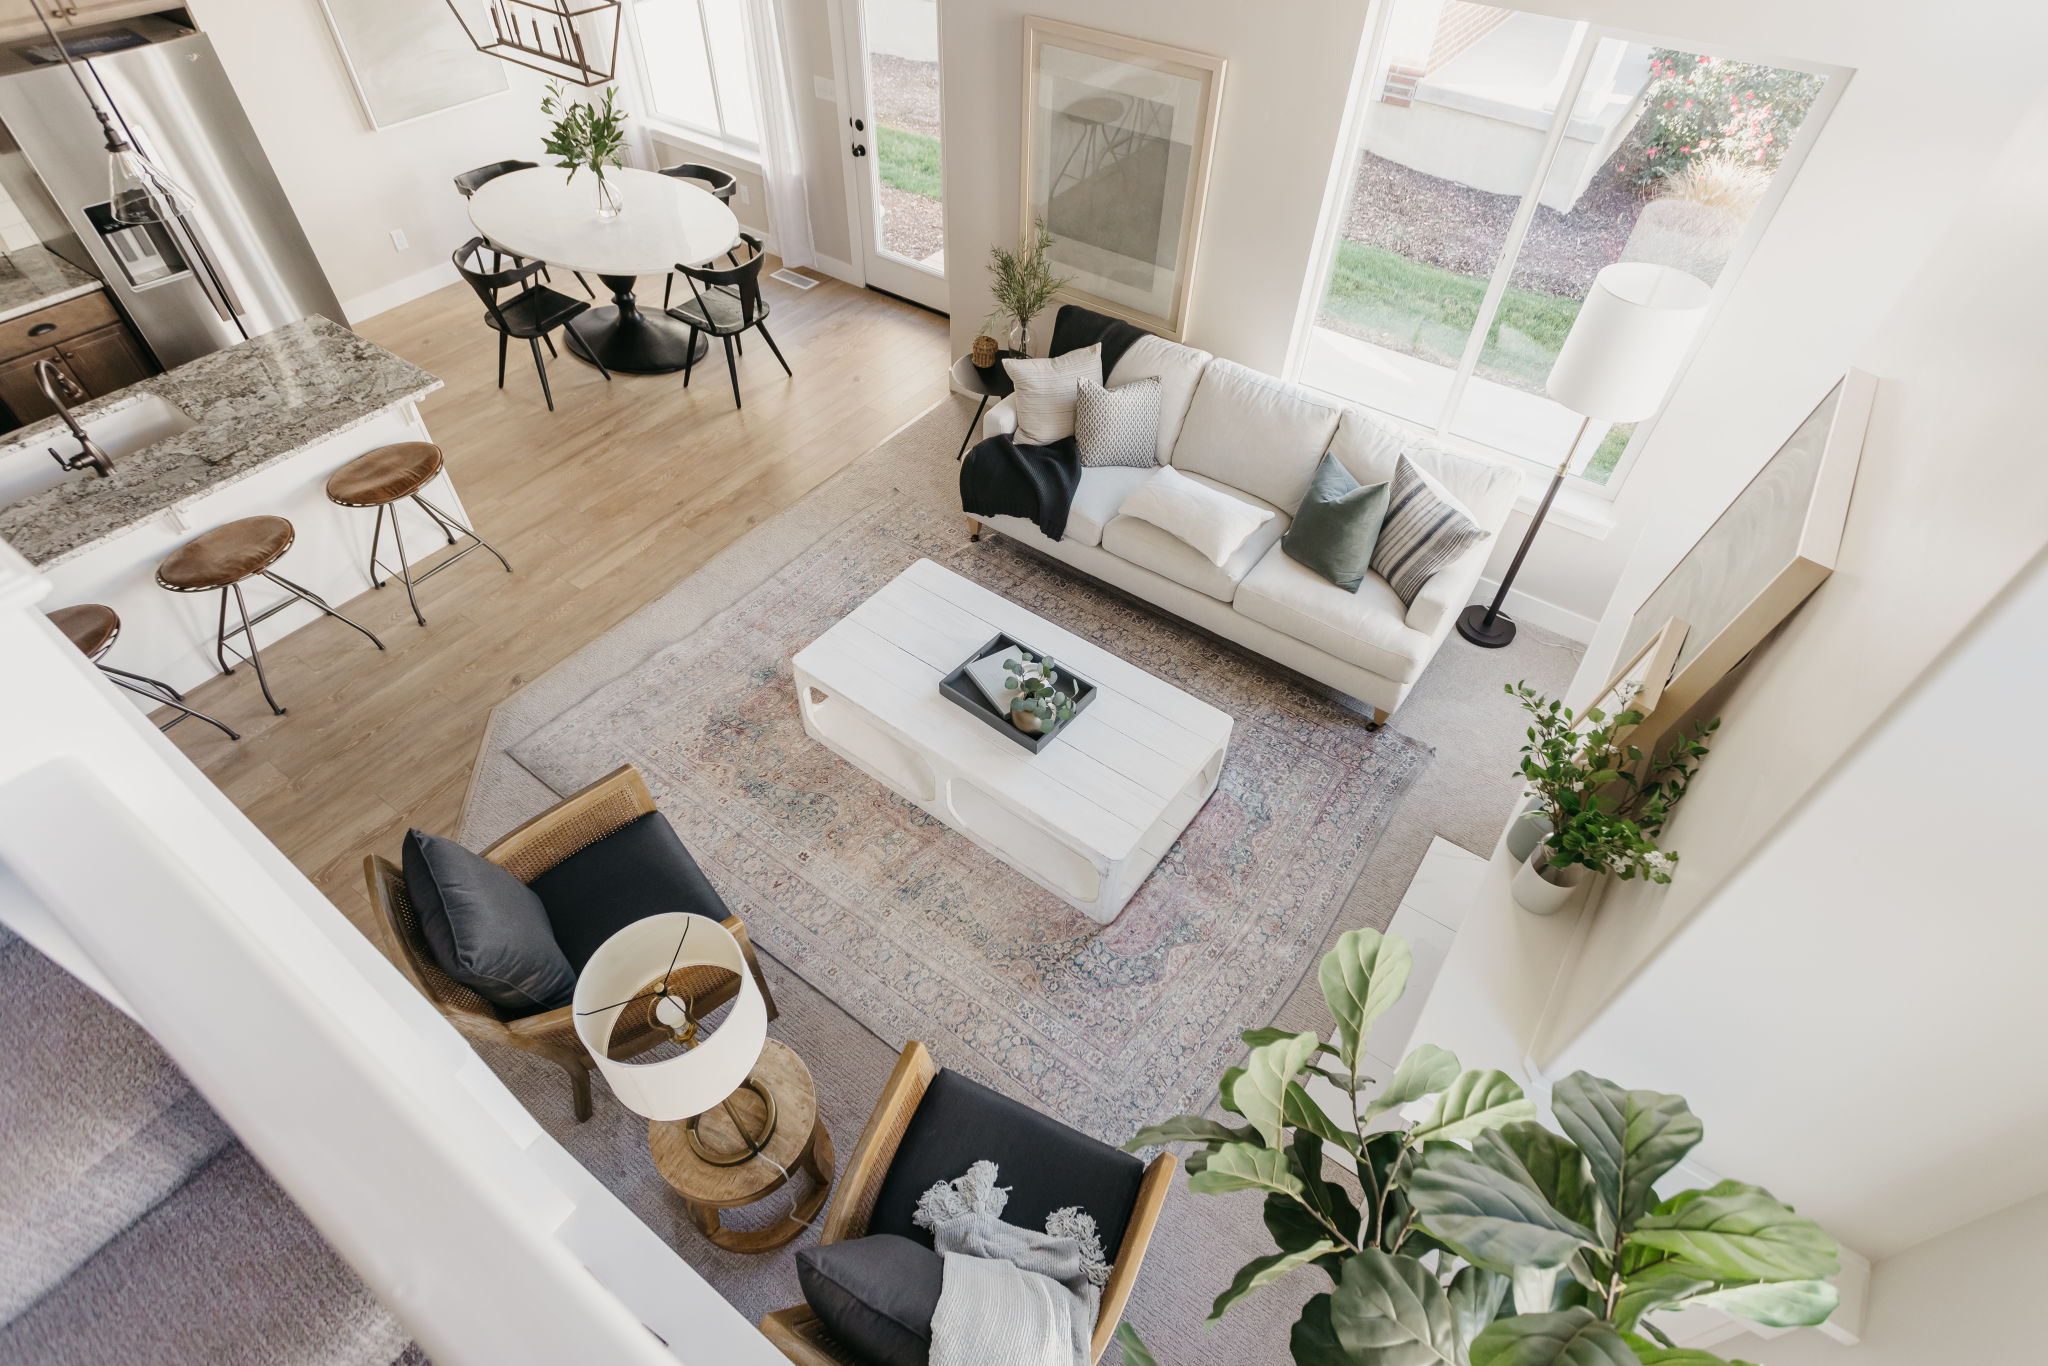 EdgeHomes: The Exchange Townhomes